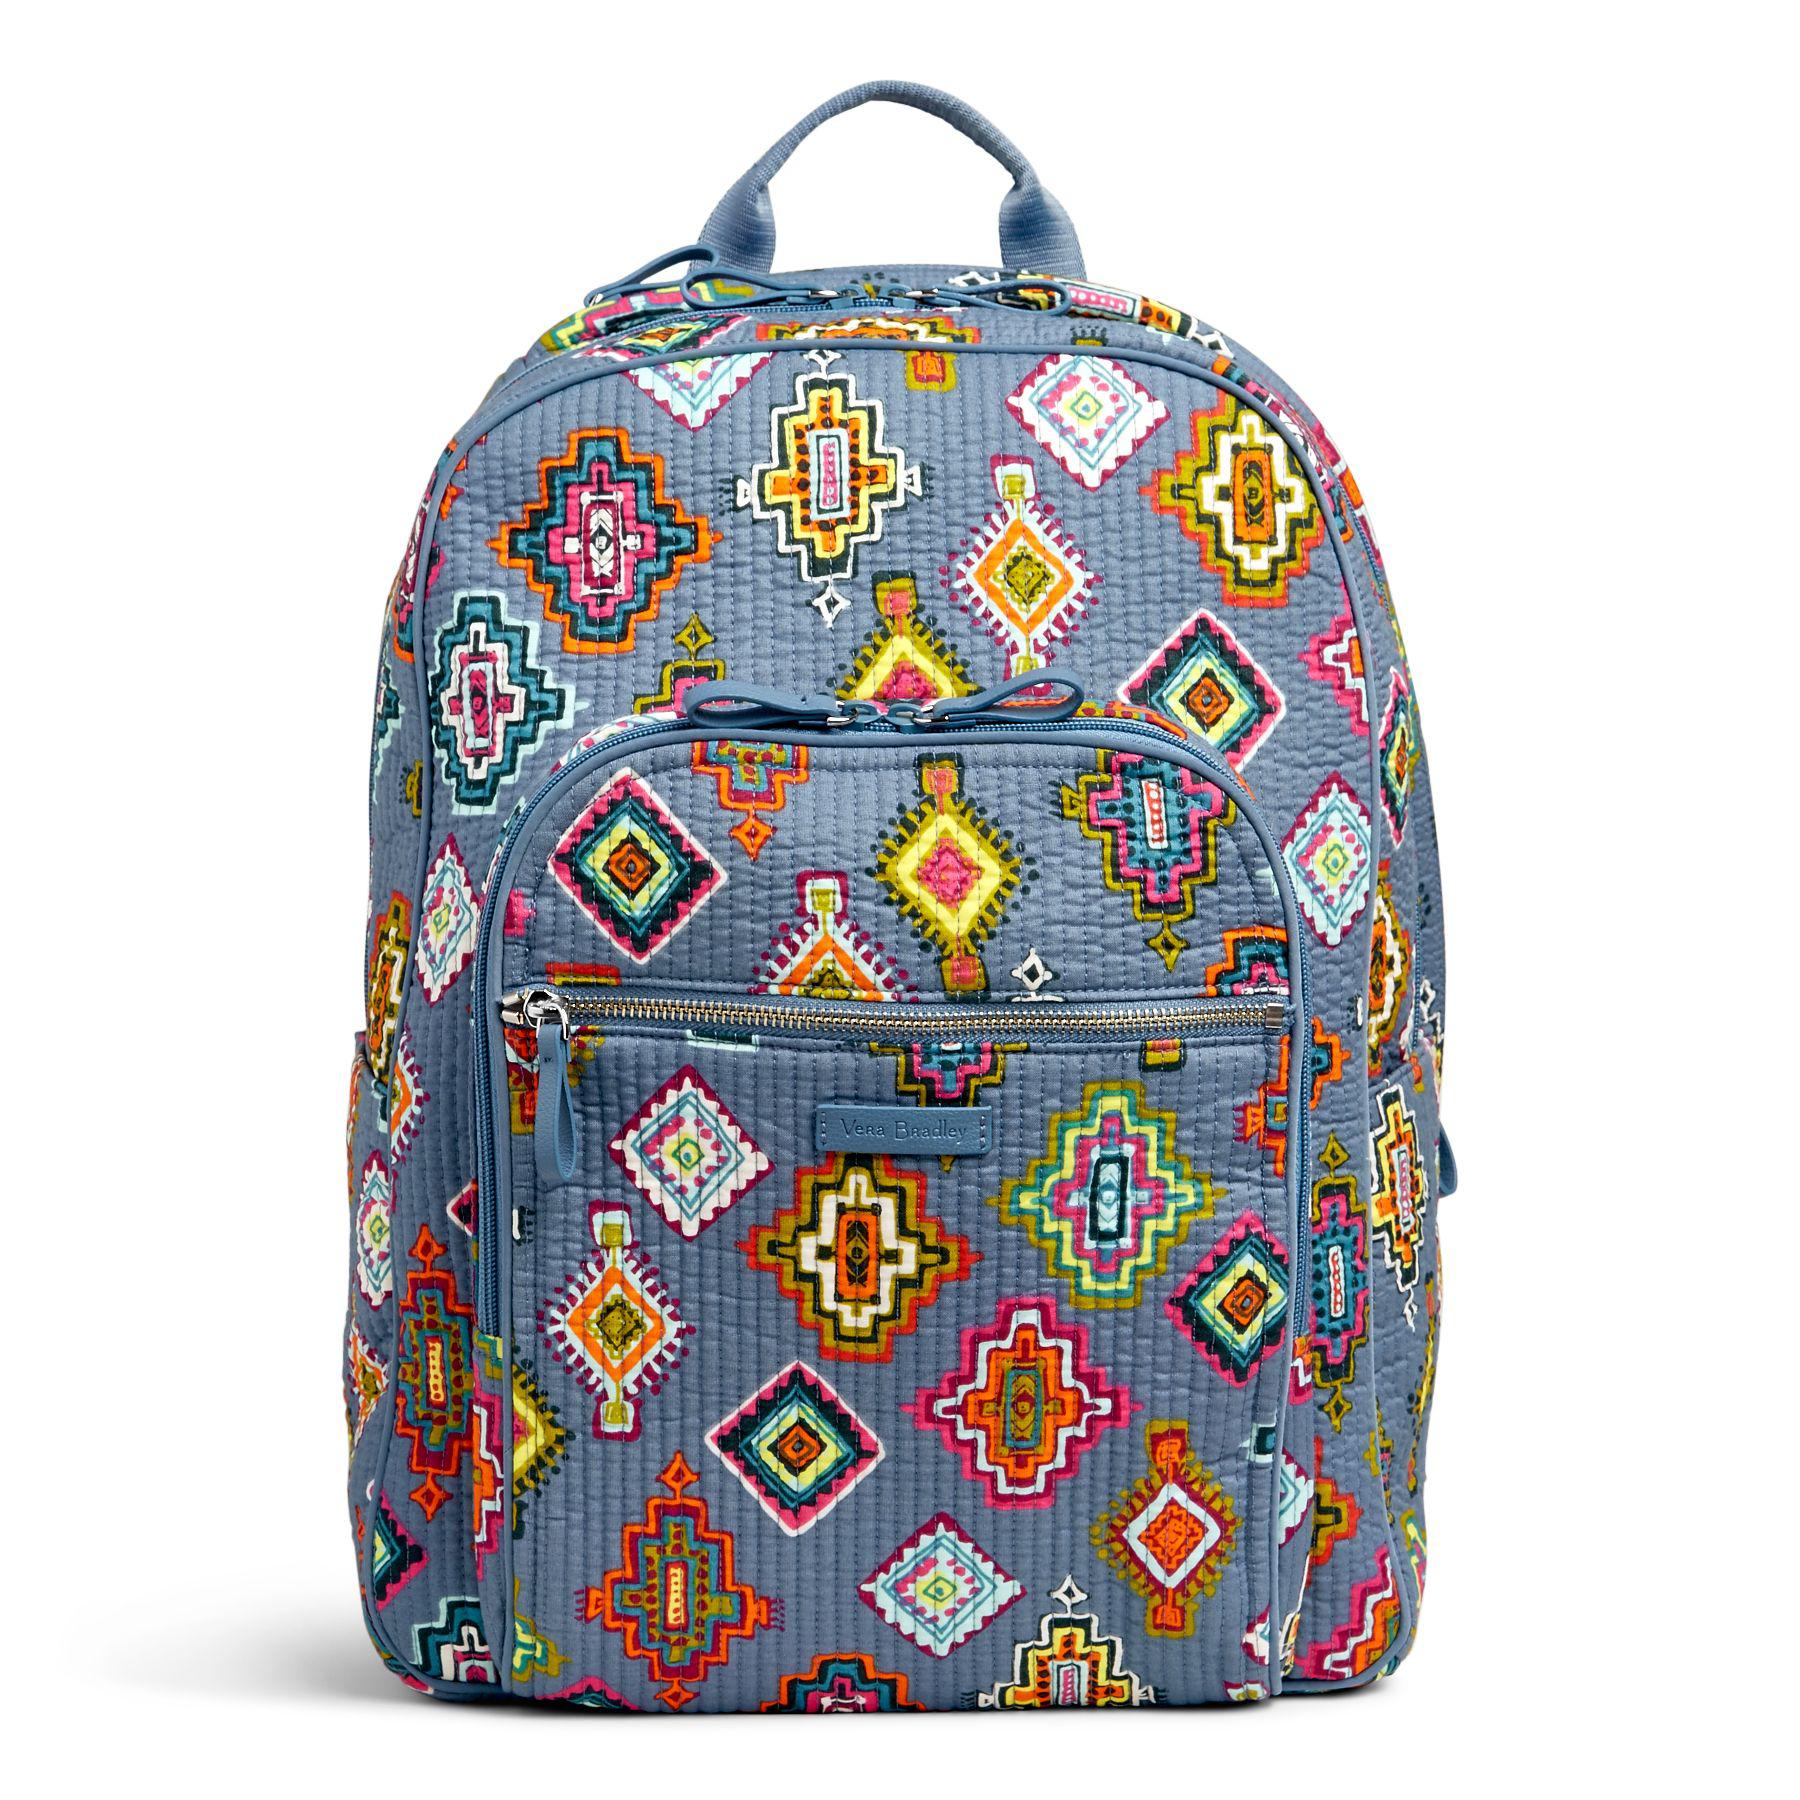 Vera Bradley Cotton Iconic Deluxe Campus Backpack in Blue - Lyst